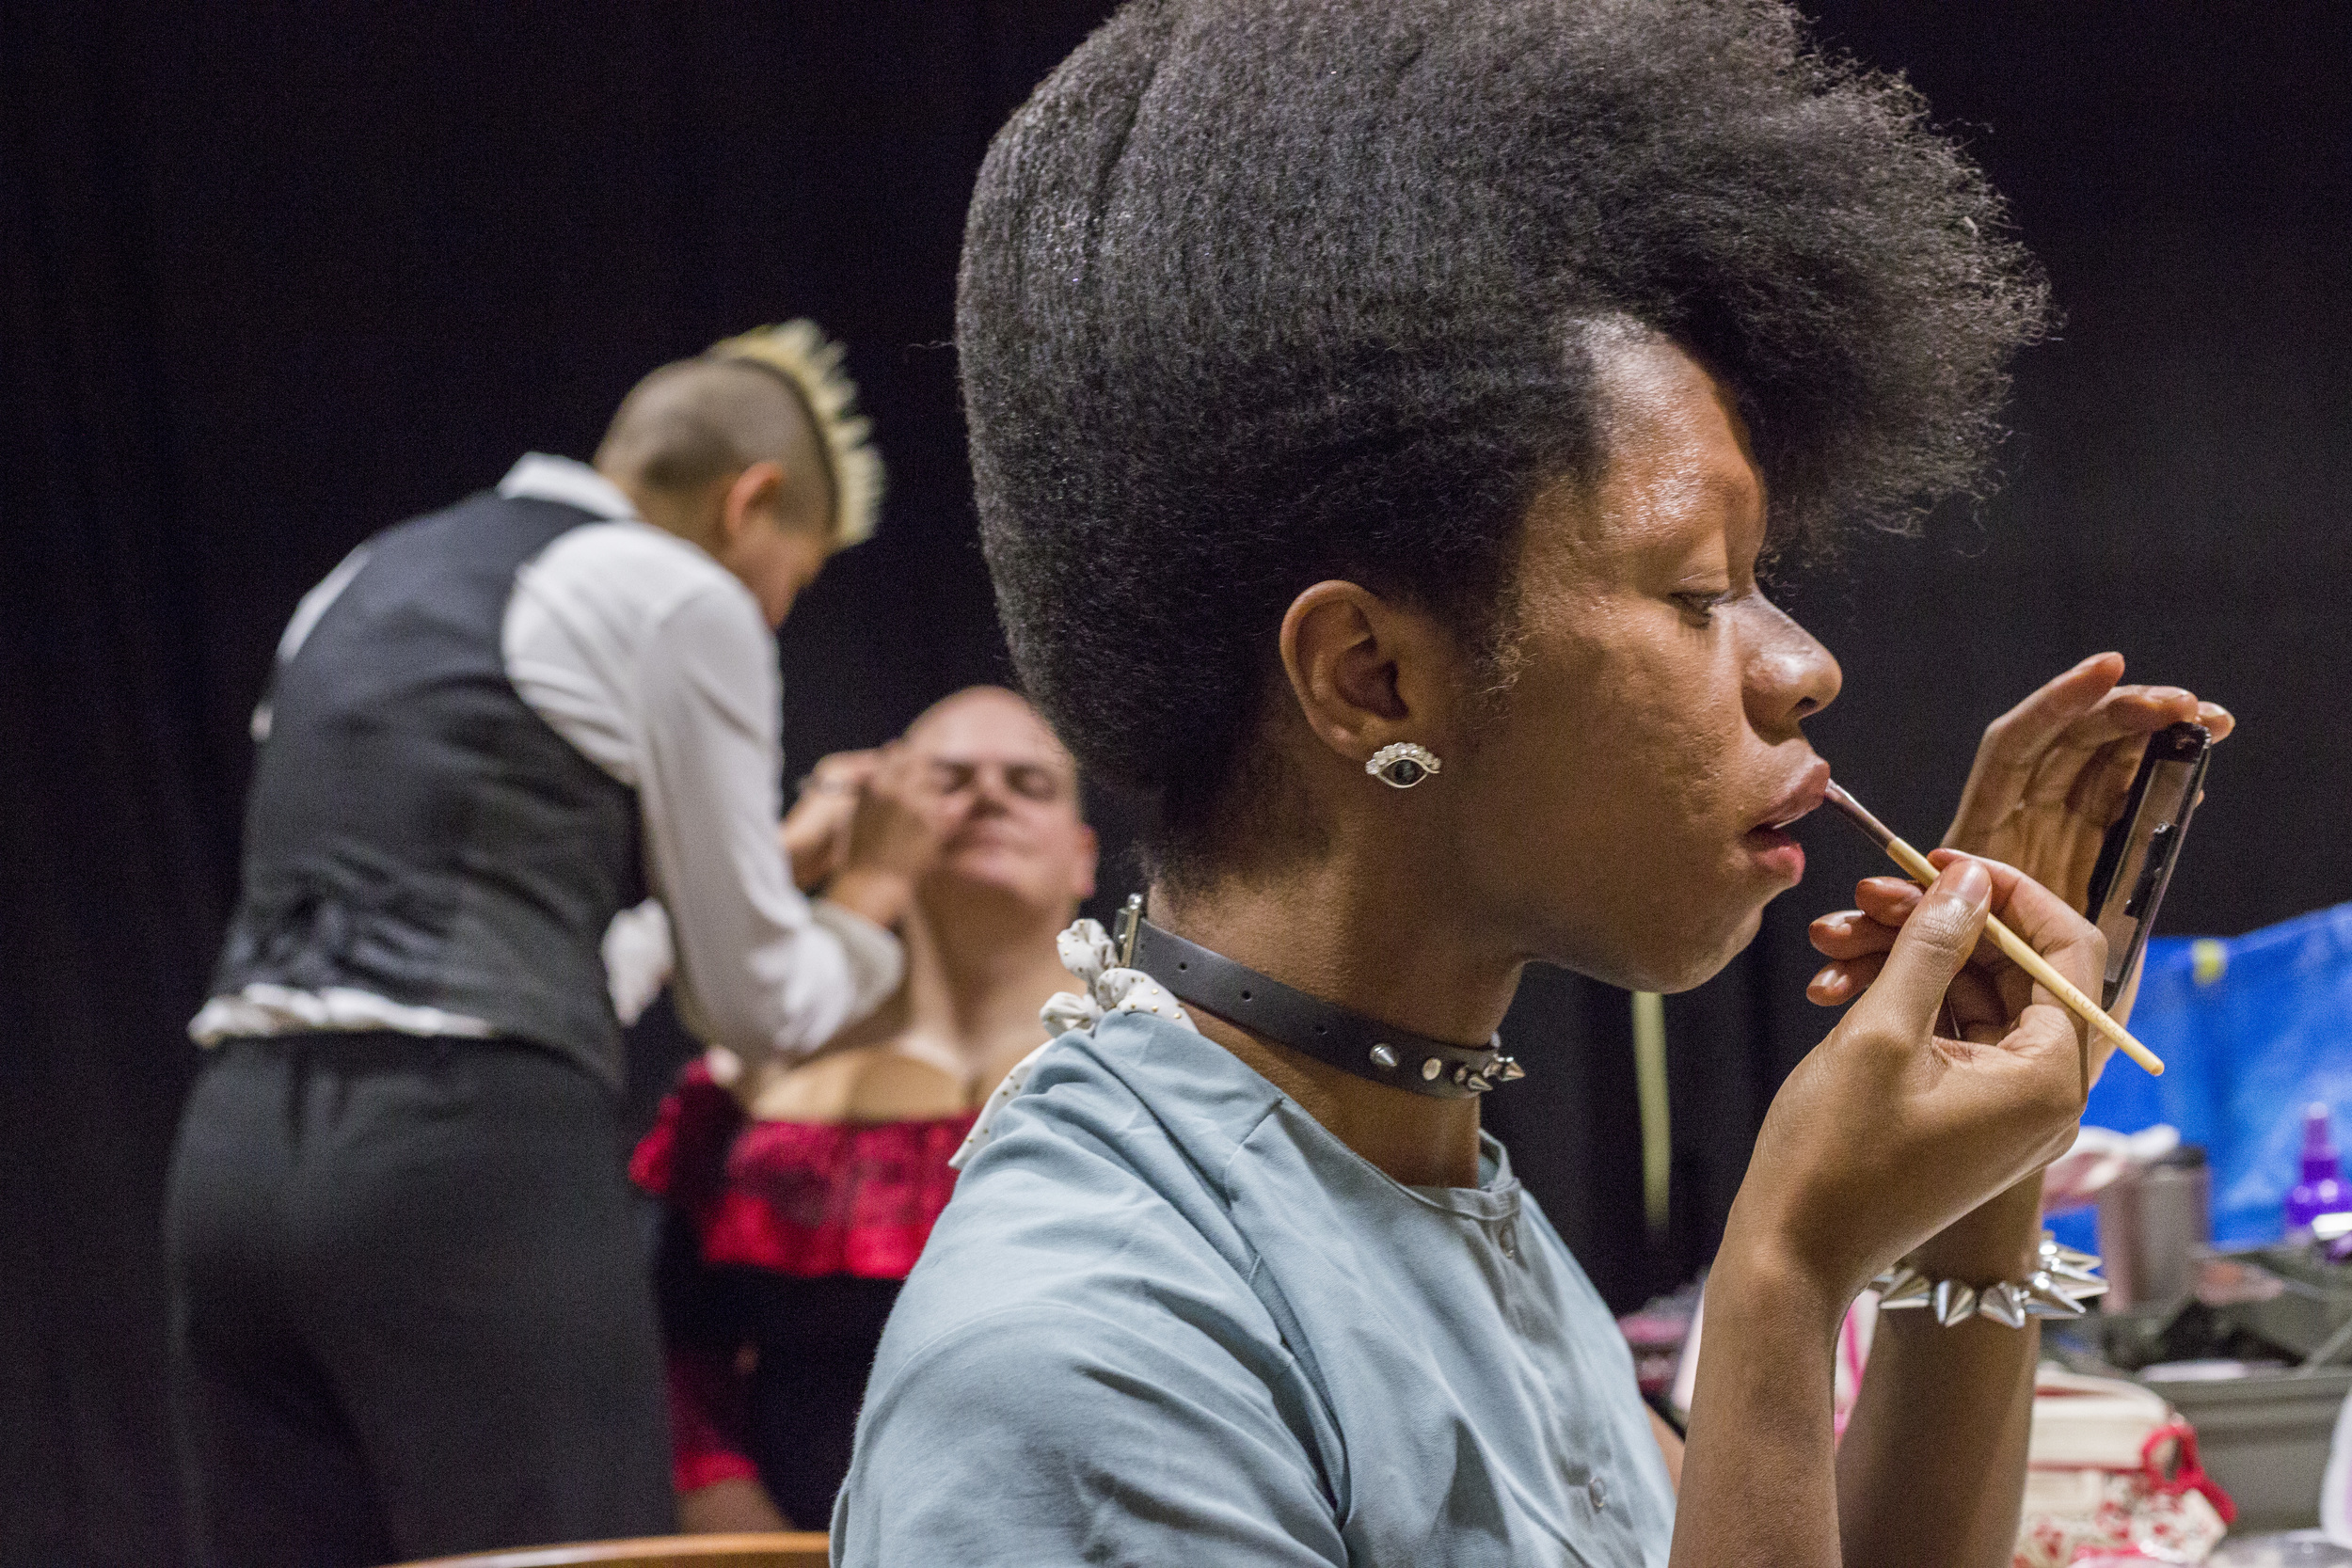  Pop "ShaVaughn" Peterson, front, of Athens, Ohio puts on lipstick while Ohio University English department instructor Megan Villegas, back left, does makeup for Delfin Bautista, back right, of Athens, Ohio in preparation for the drag show on January